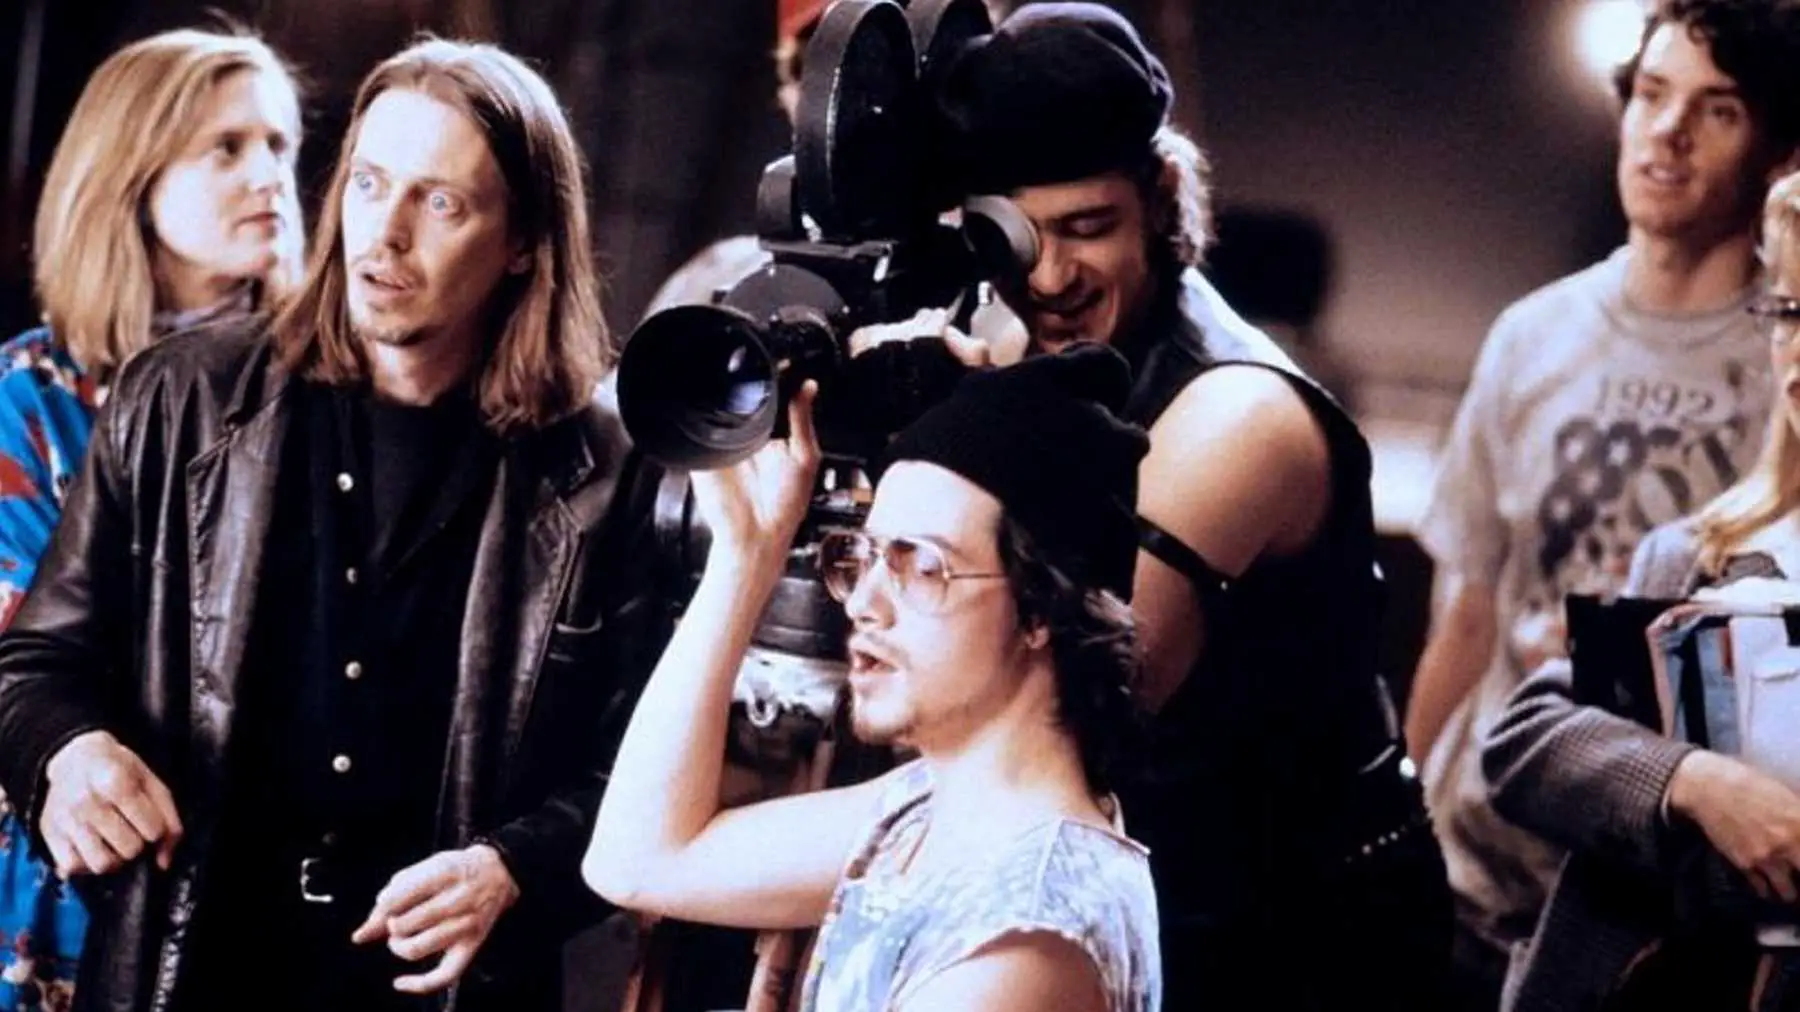 Wanda, Nick, the Assistant Cameraman, and Wolf stand around the camera, shooting a scene